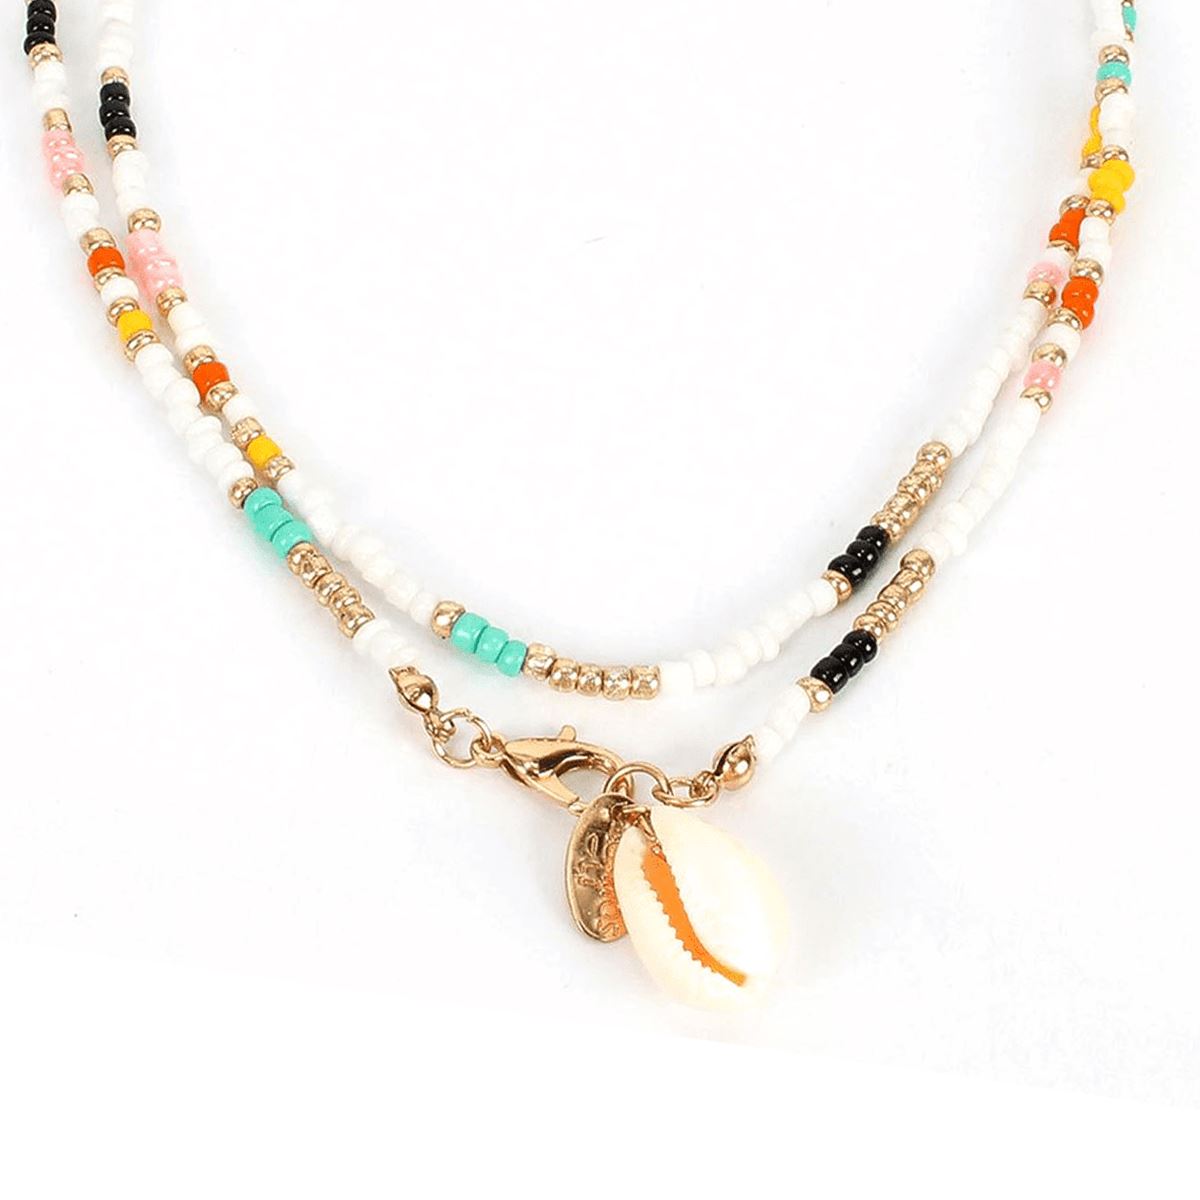 "Collier Heishi Coquillage" translates to "Heishi Shell Necklace" in English.